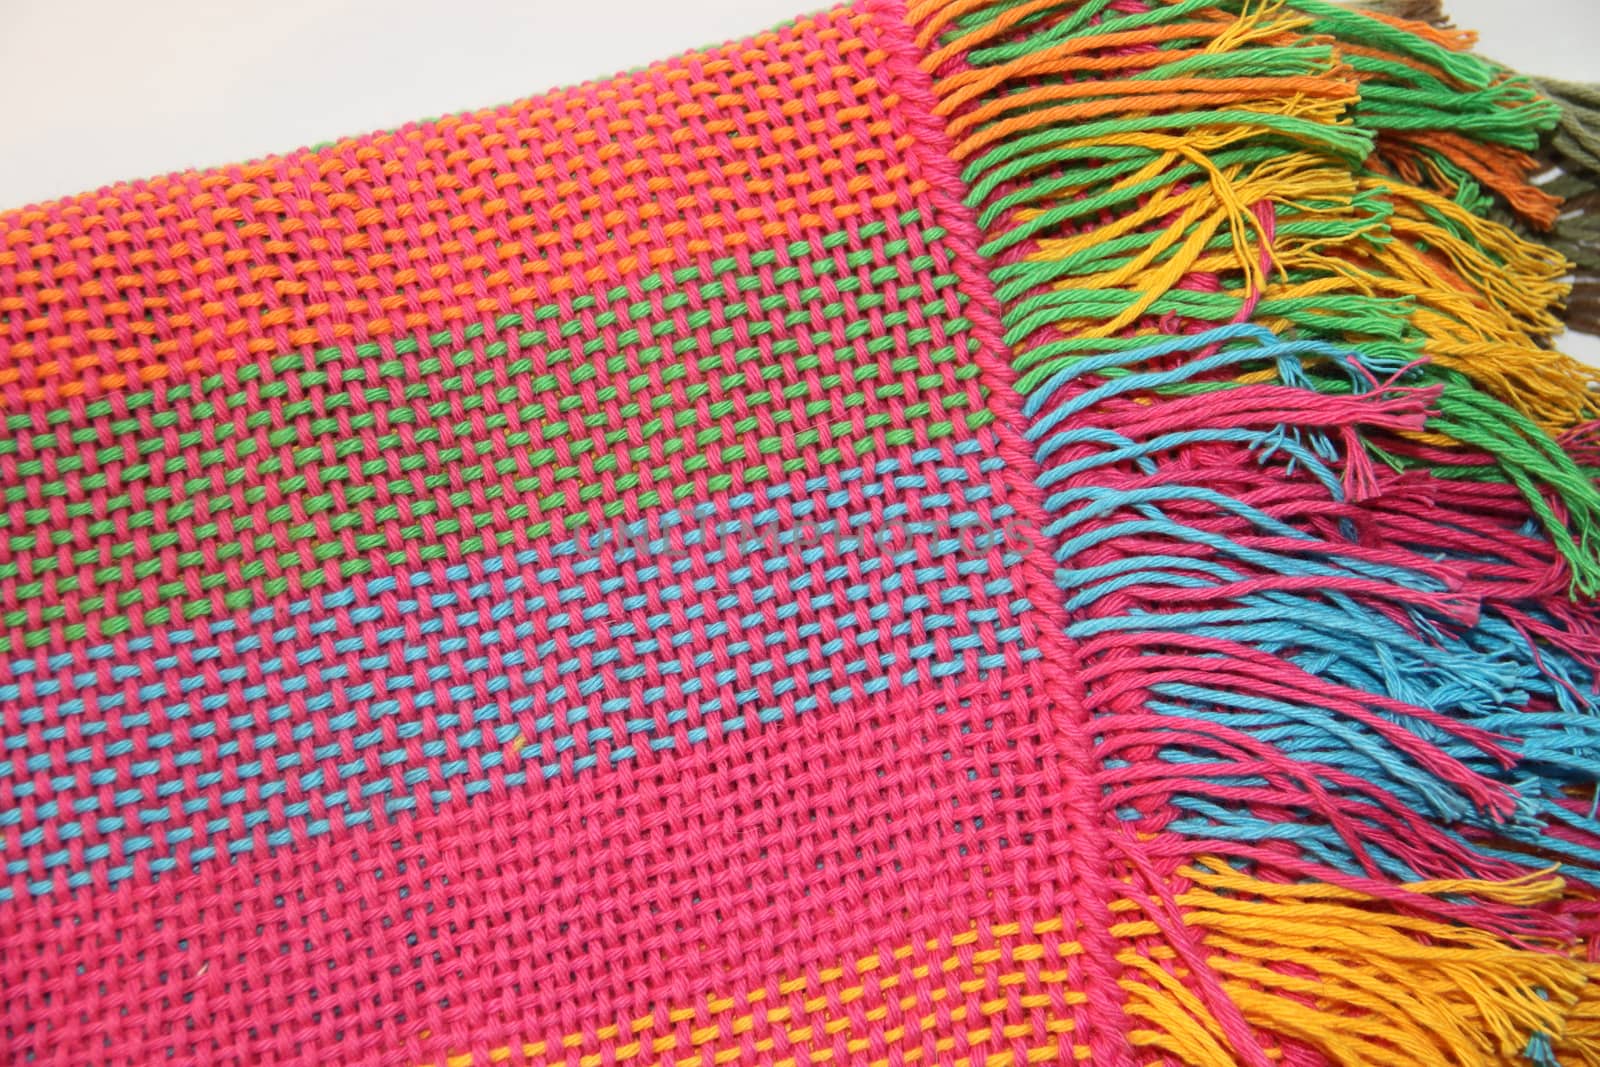 colorful knitted garments and blankets, comb loom, yarns  by GabrielaBertolini